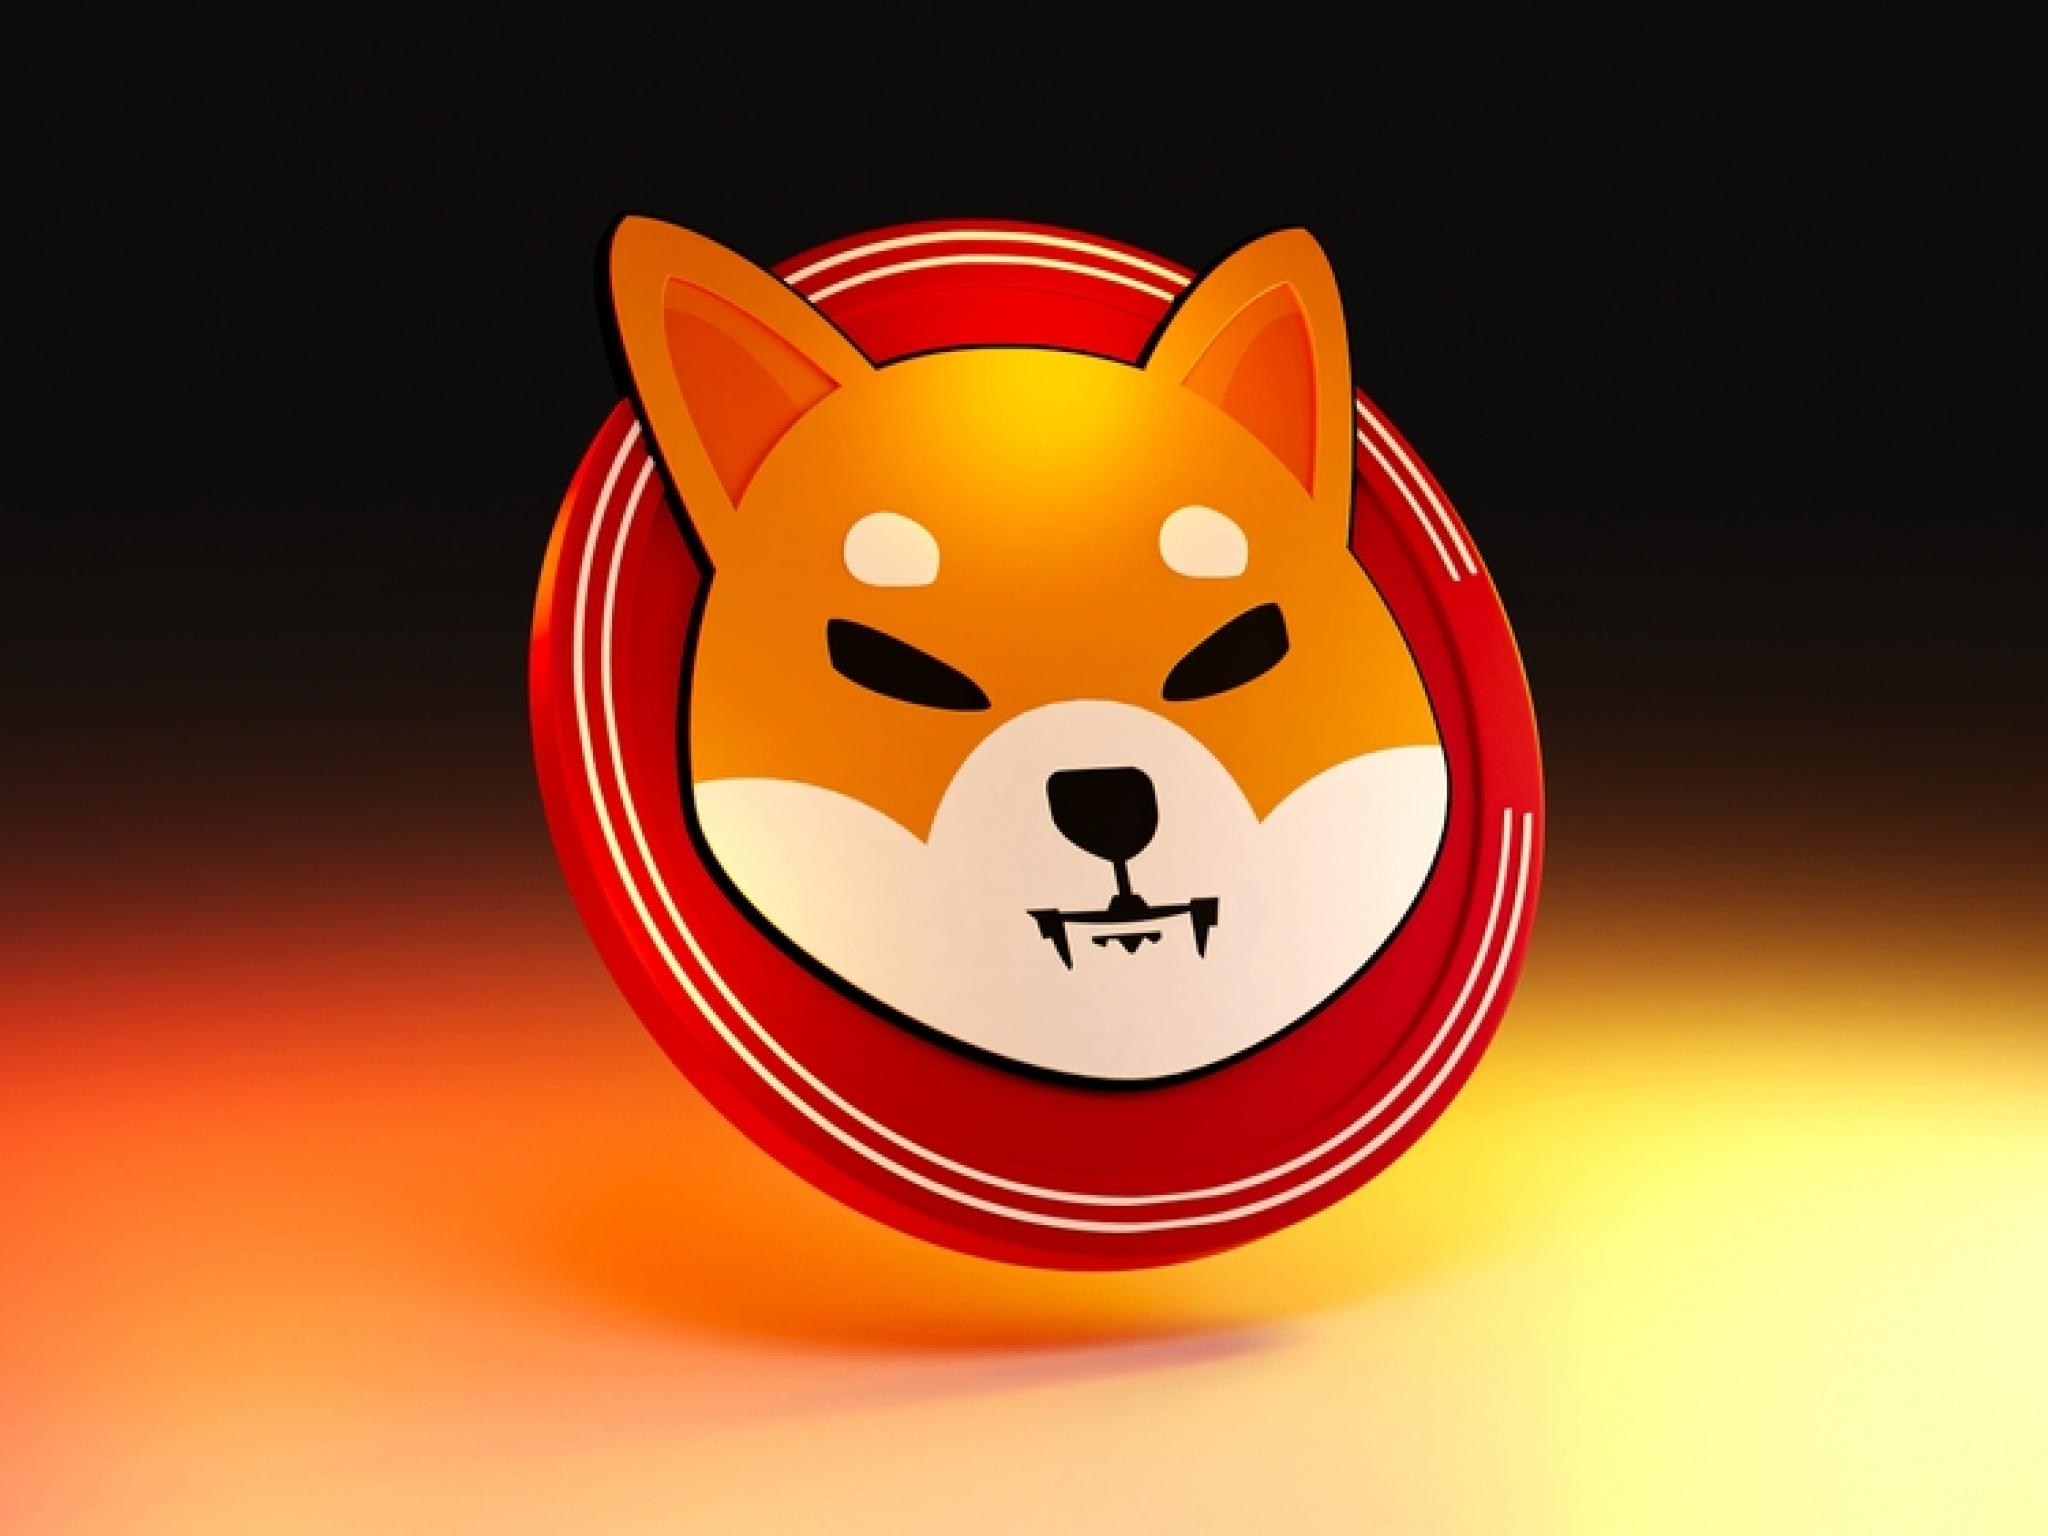  shiba-inu-celebrates-4th-anniversary-heres-how-much-the-memecoin-has-grown-since-launch-against-pioneer-dogecoin 